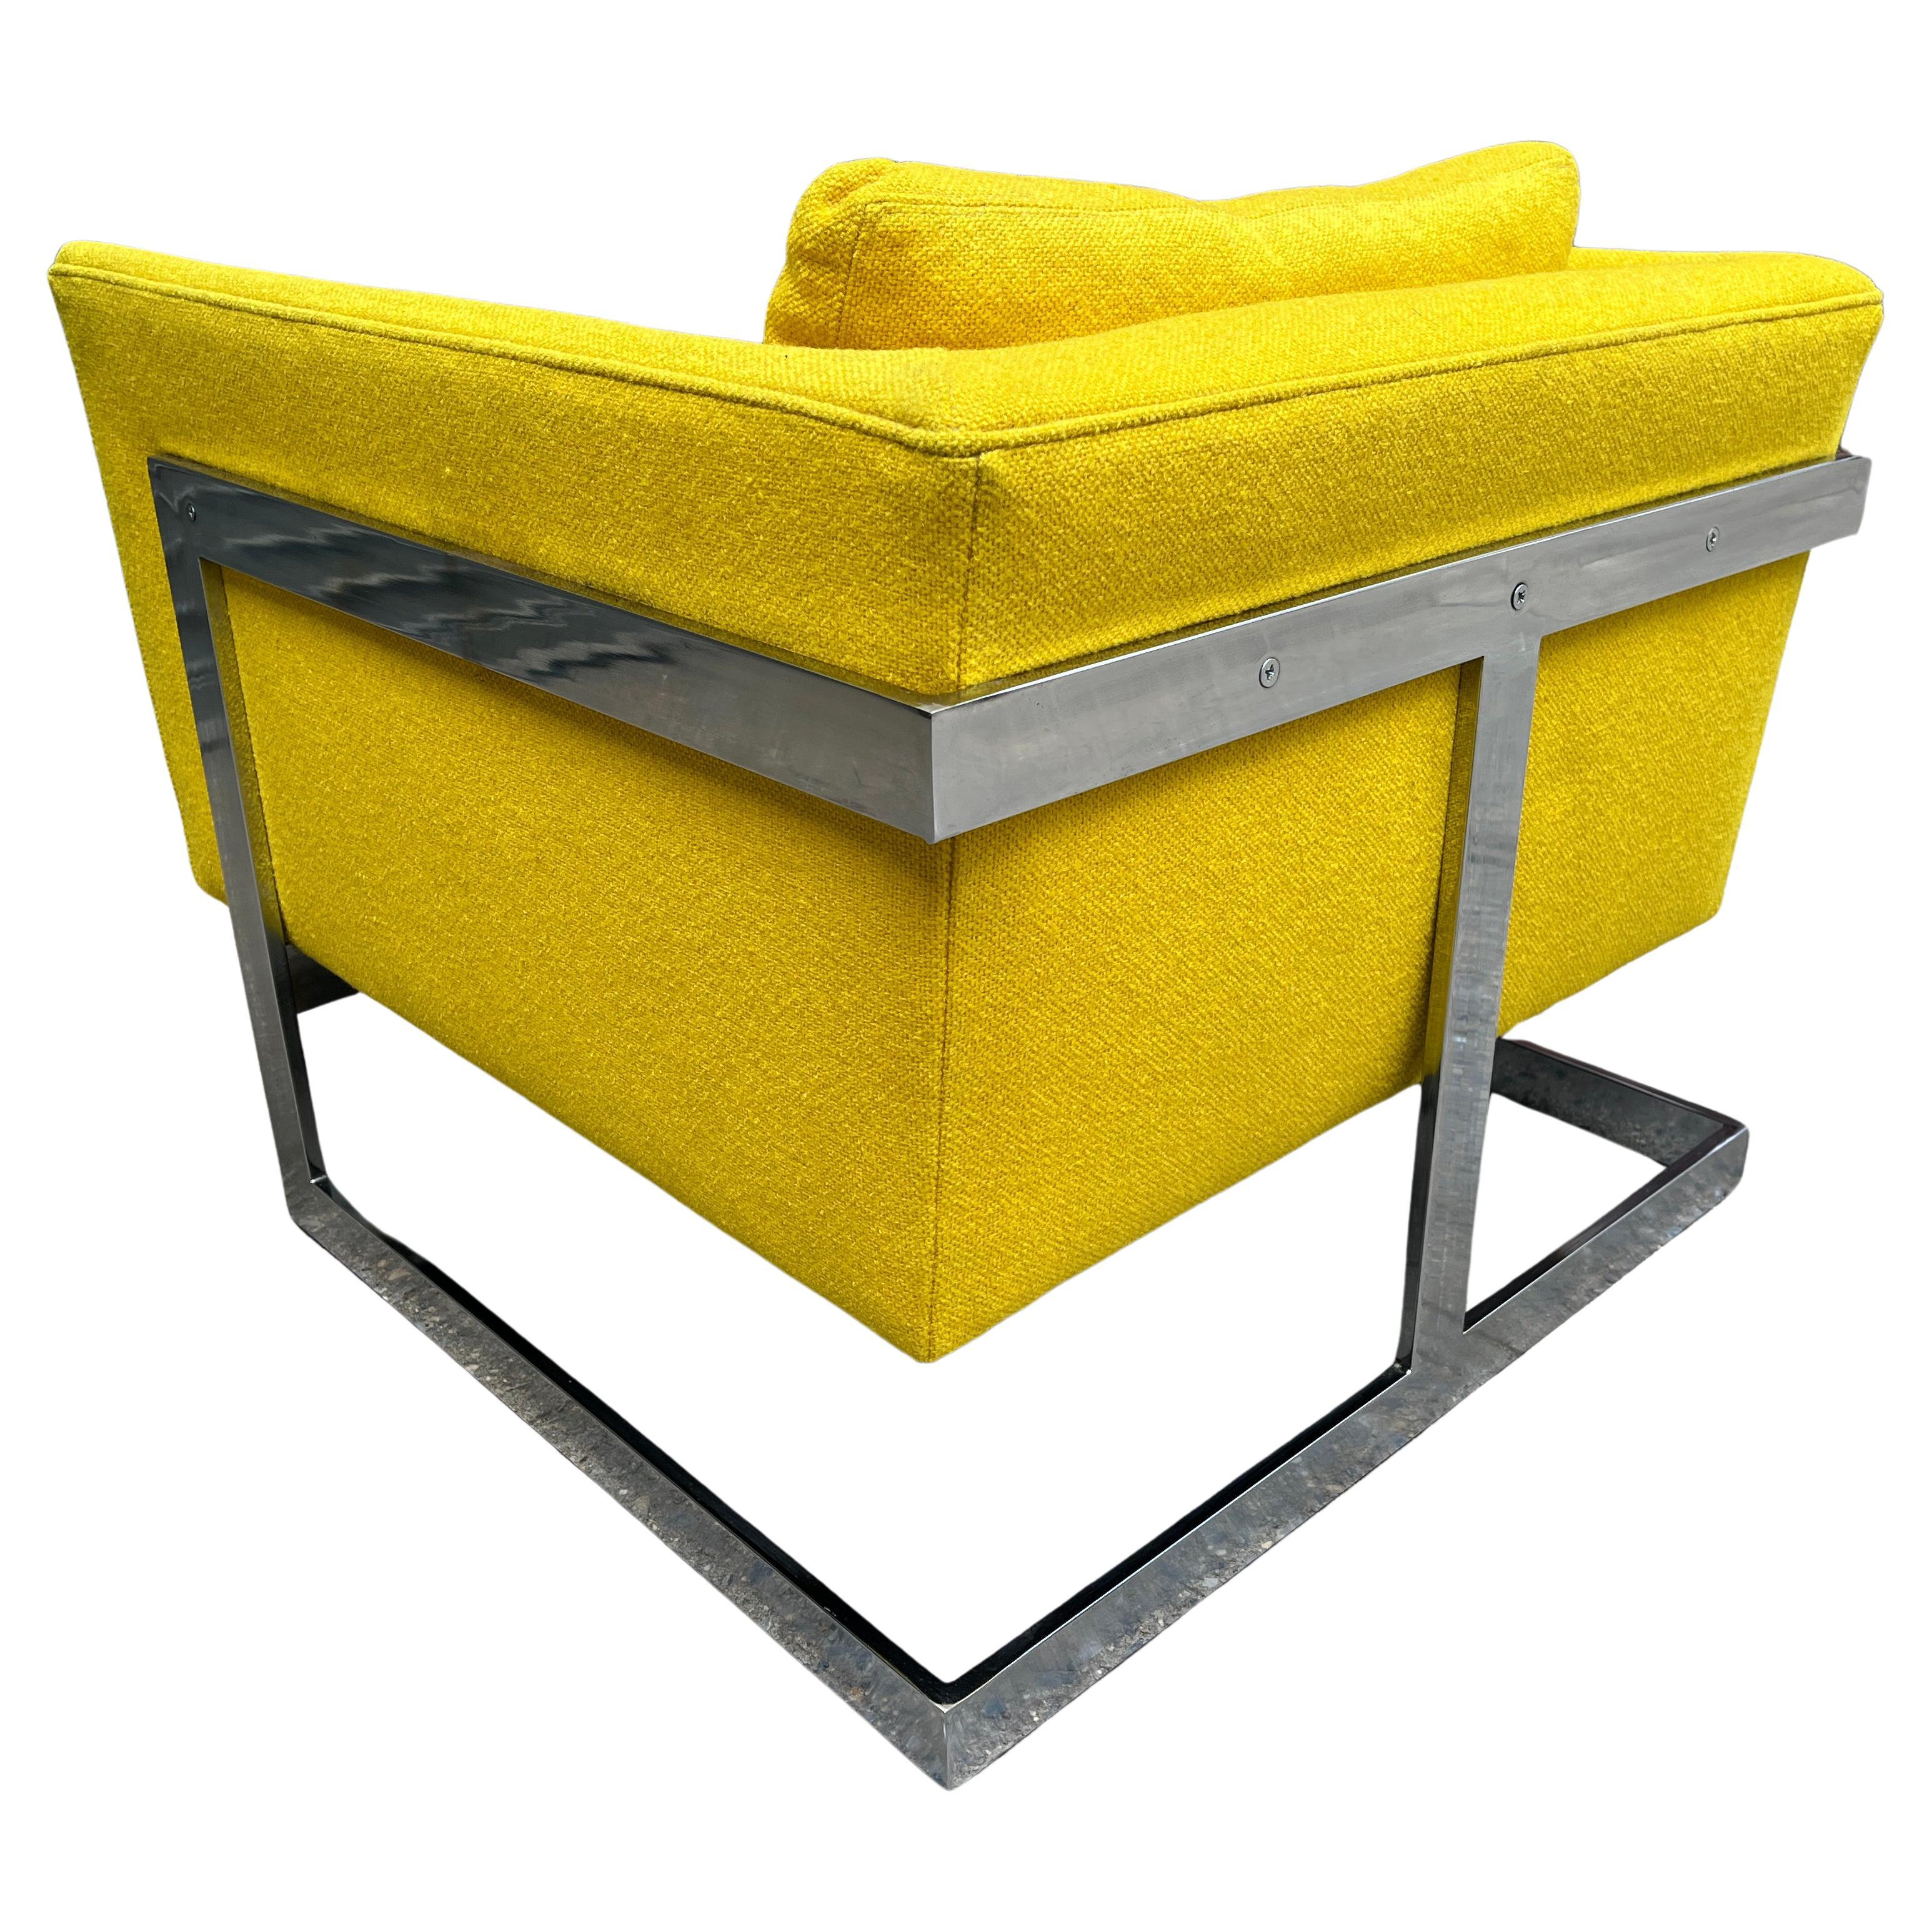 Architectural club / lounge chair upholstered in original yellow fabric by Milo Baughman for Thayer Coggin. This chair features an asymmetric chrome frame fixed to a cube seat. Cantilevered on solid flat bar chromed steel with no pitting bright and